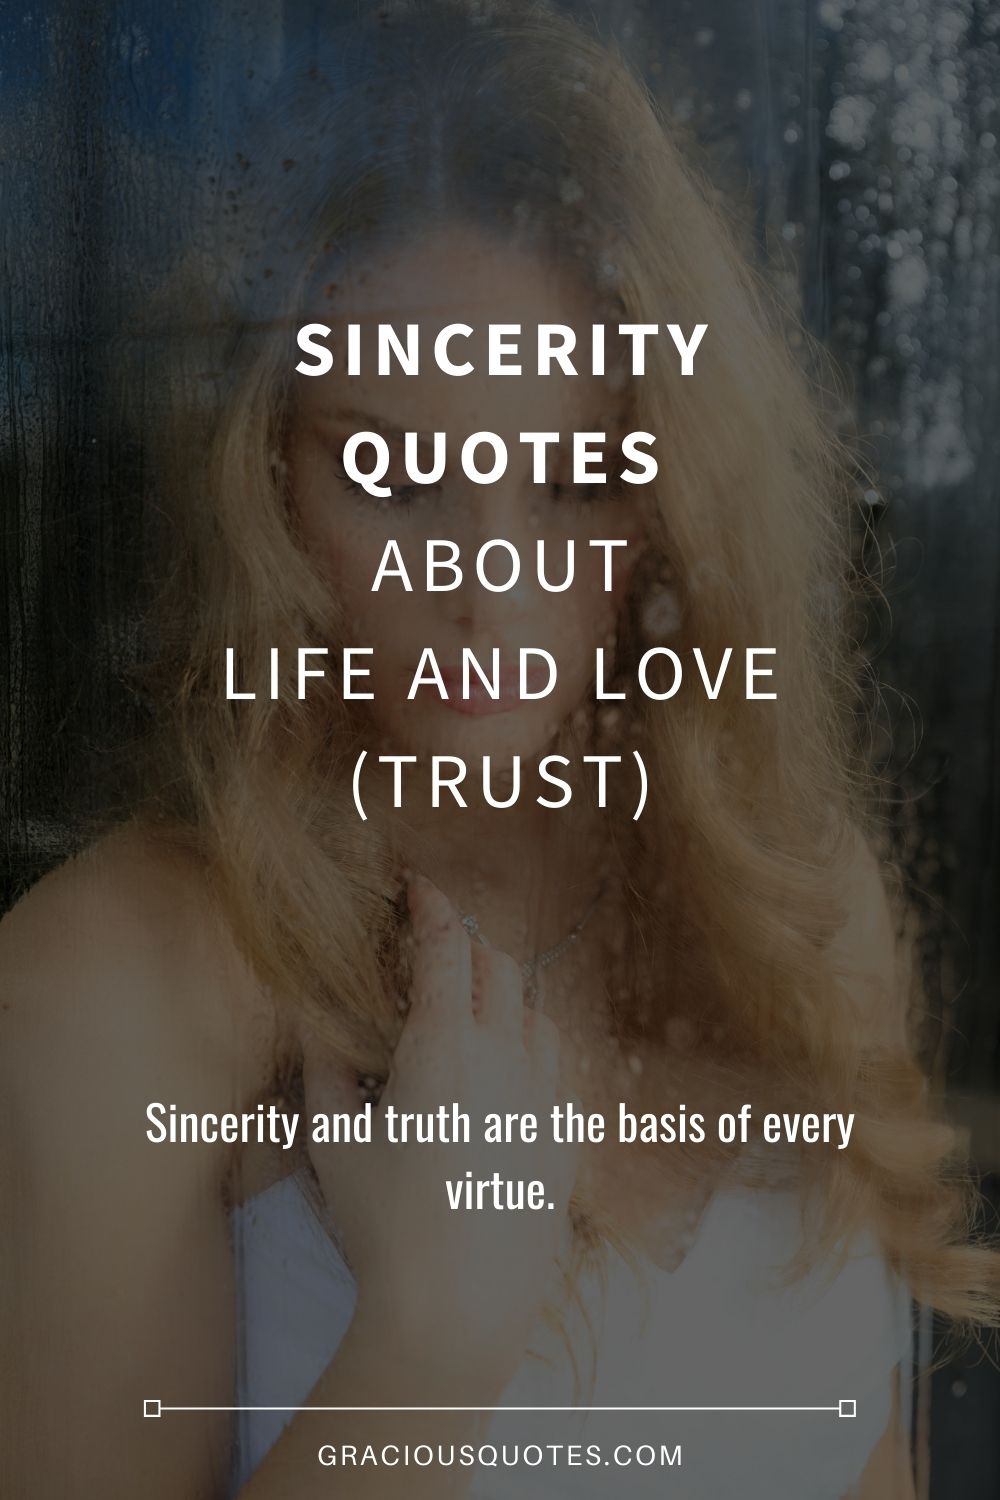 Sincerity Quotes About Life and Love (TRUST) - Gracious Quotes